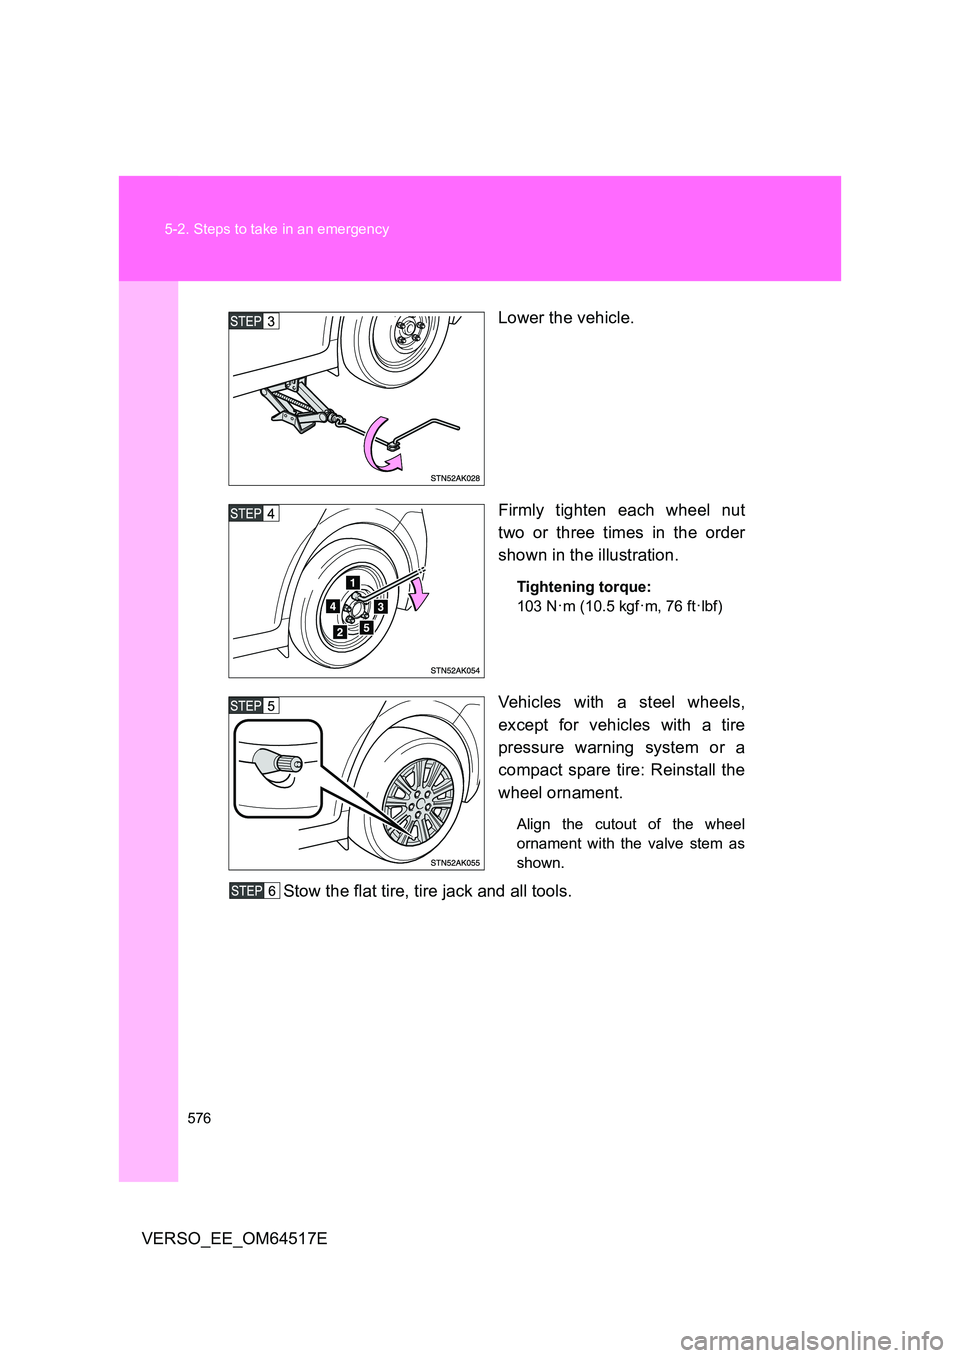 TOYOTA VERSO 2017  Owners Manual 576 
5-2. Steps to take in an emergency
VERSO_EE_OM64517E 
Lower the vehicle. 
Firmly tighten each wheel nut 
two or three times in the order 
shown in the illustration.
Tightening torque: 
103 N·m (